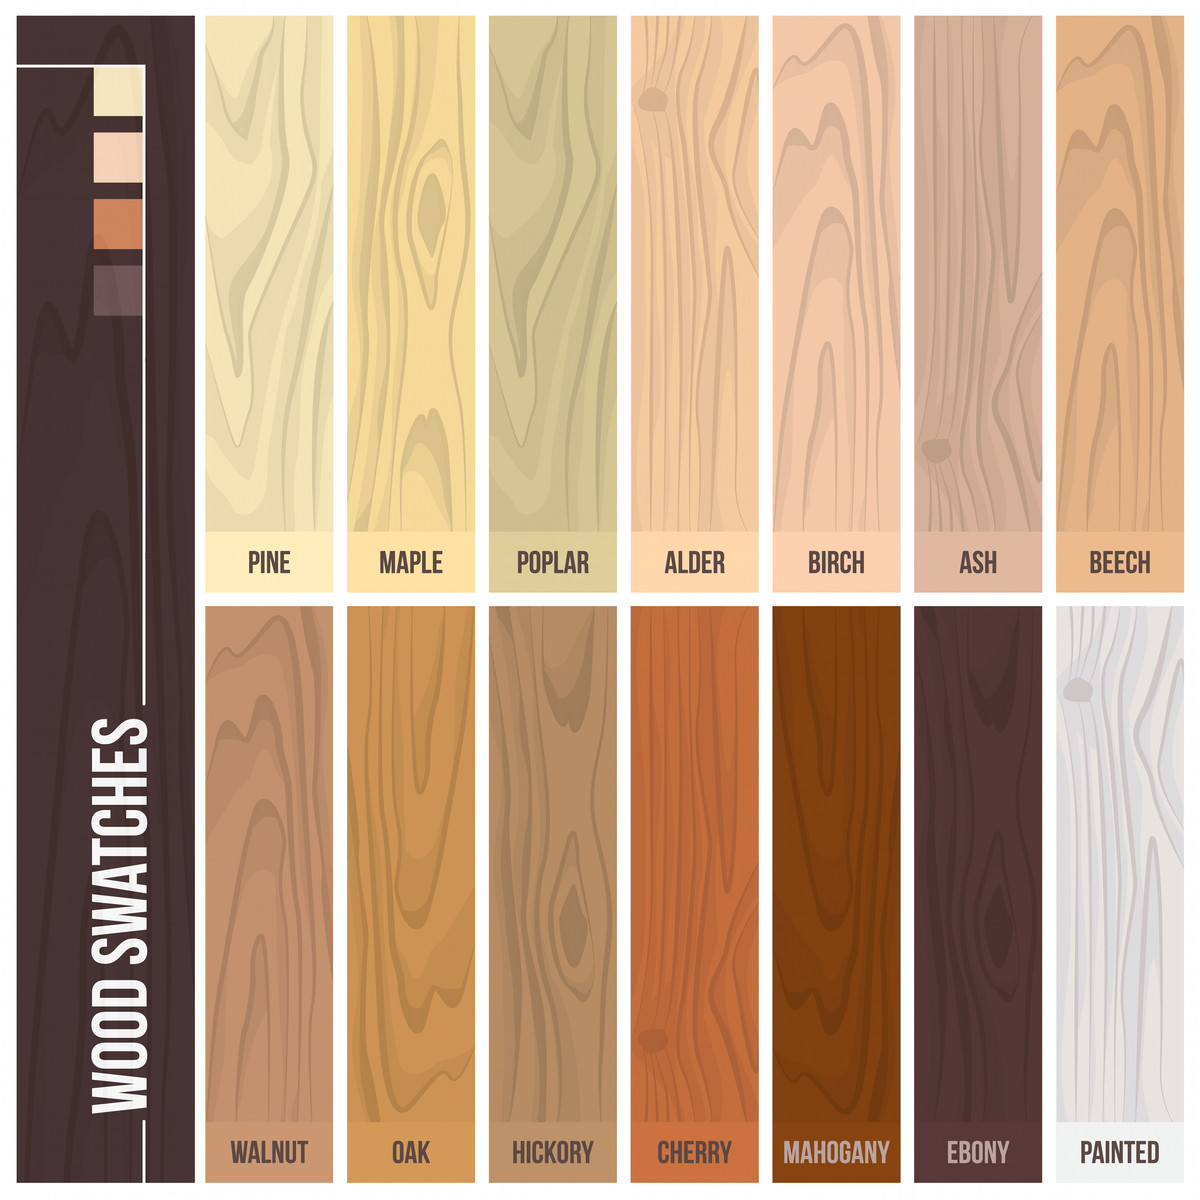 14 Famous Staining Hardwood Floors by Hand 2024 free download staining hardwood floors by hand of 12 types of hardwood flooring species styles edging dimensions within types of hardwood flooring illustrated guide